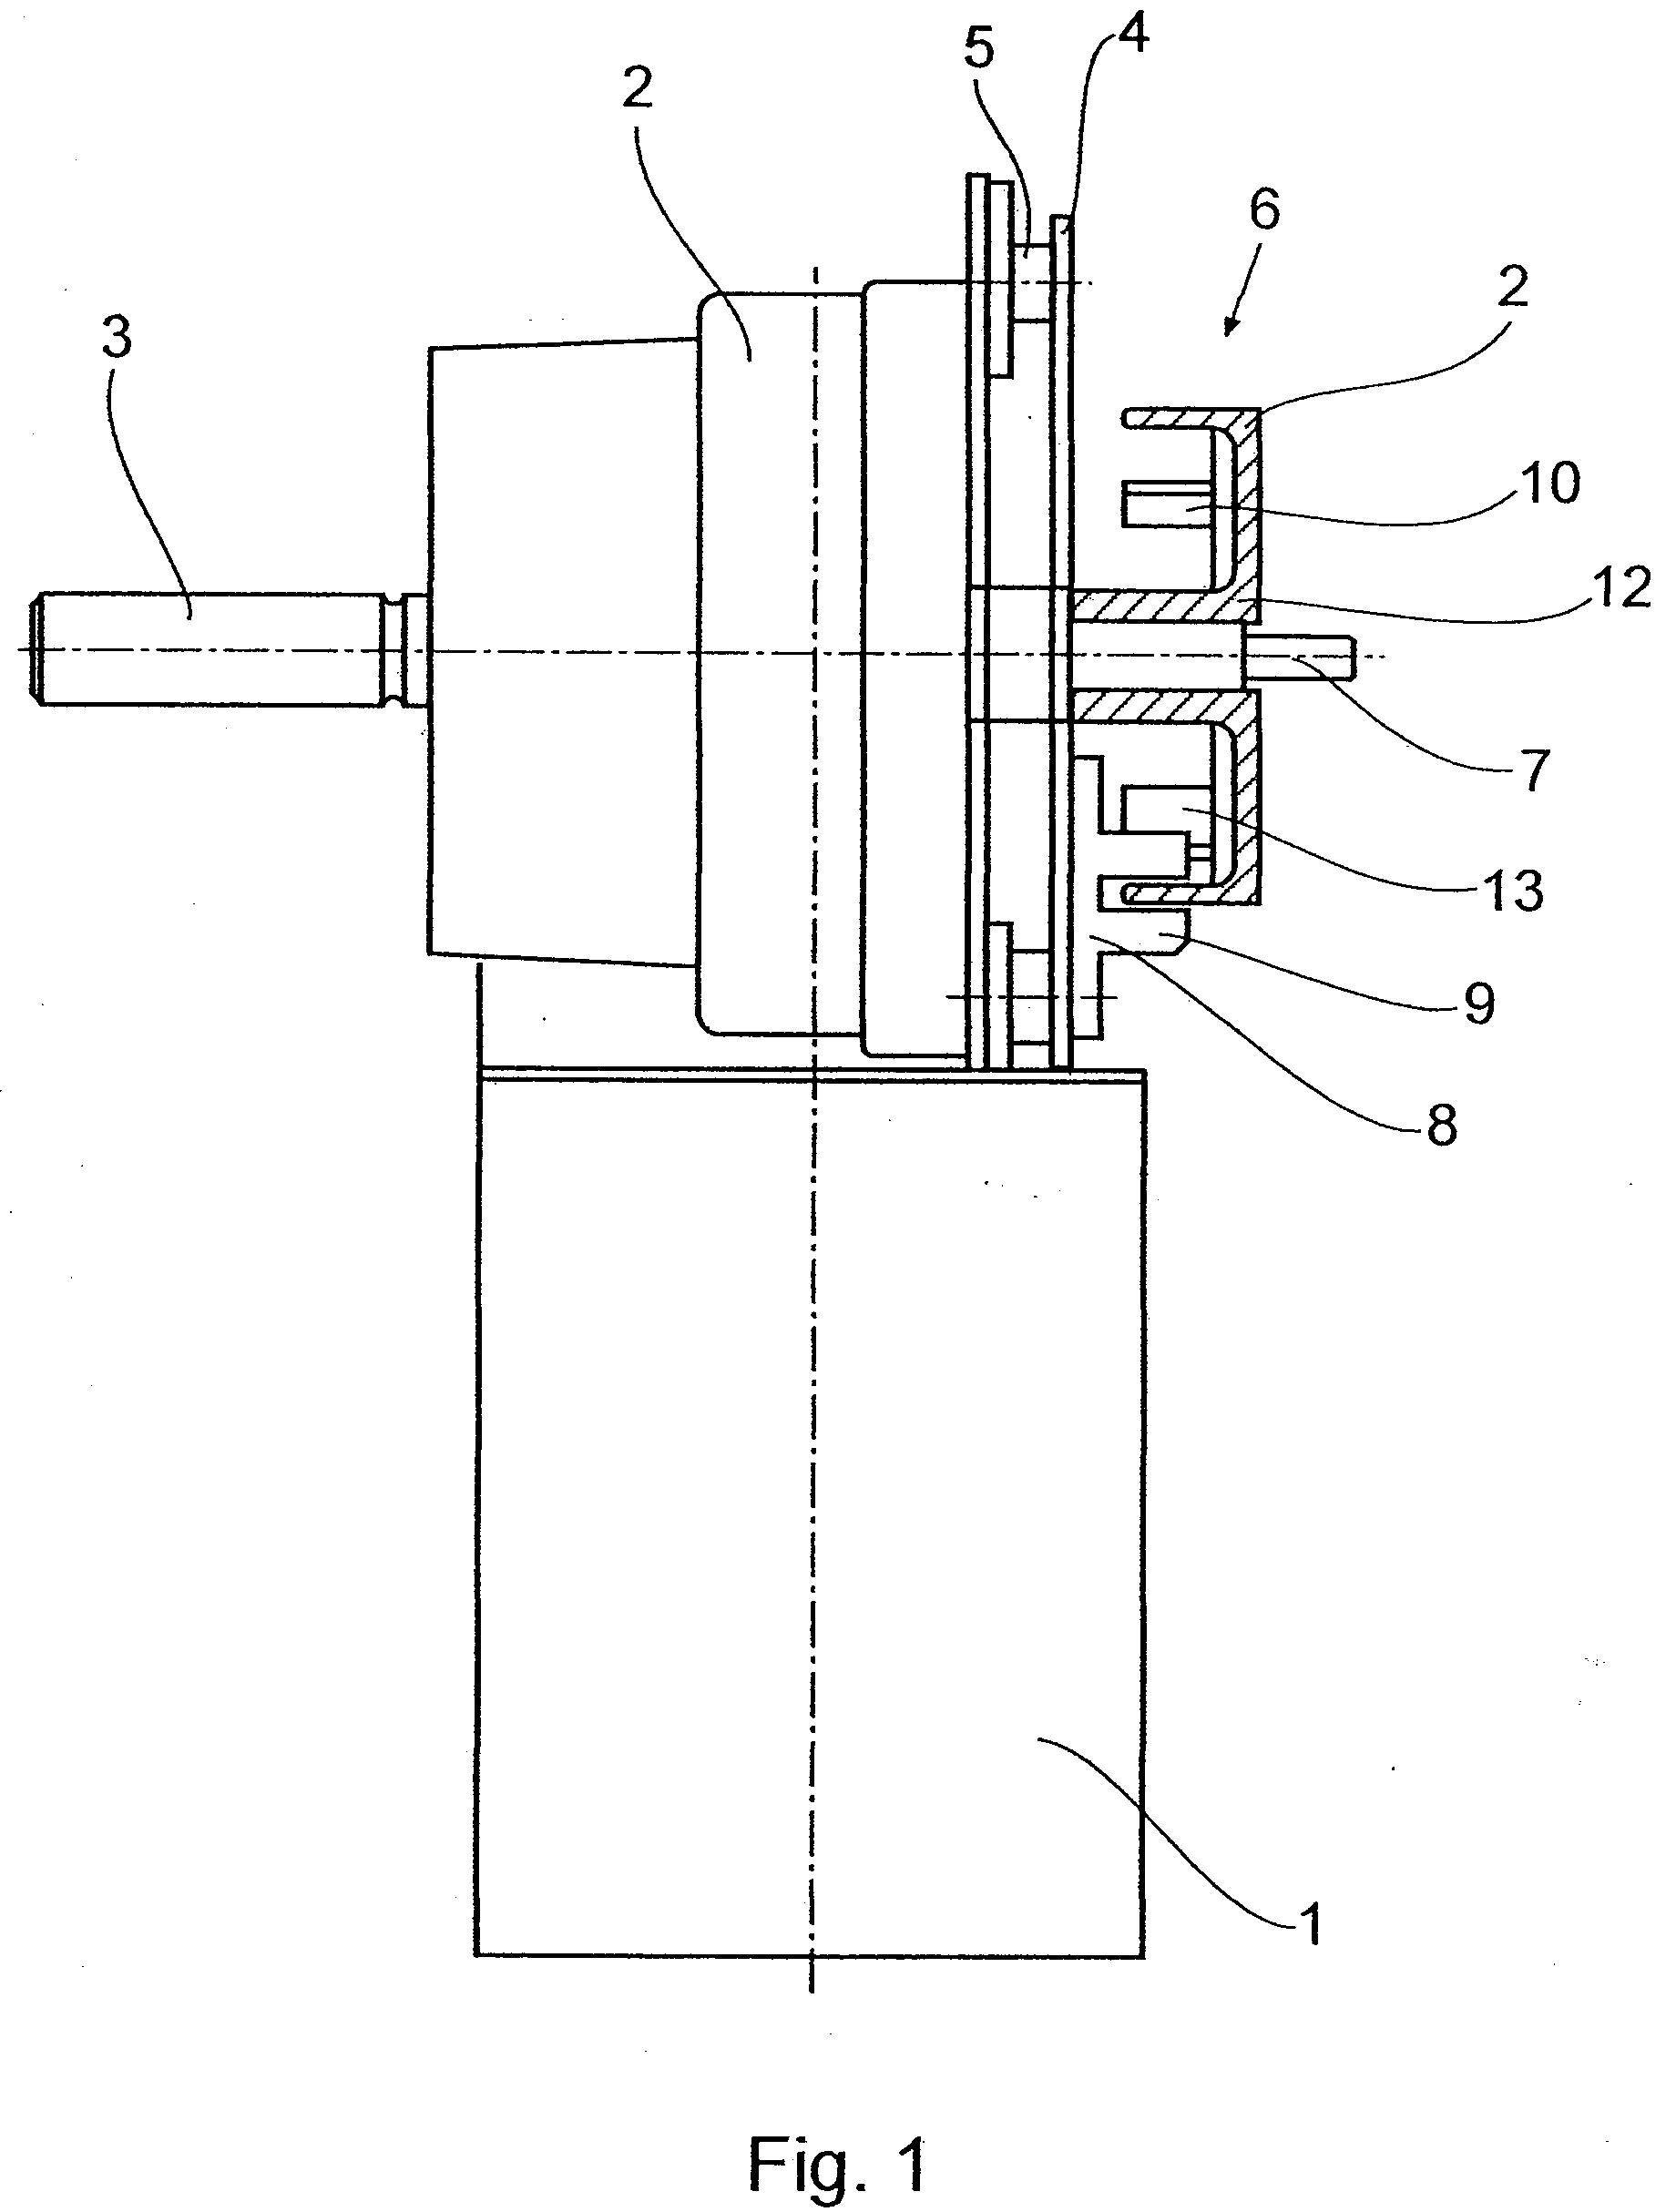 Drive Unit for a Door or Gate, Particularly for a Garage Door, and Method for Operating Such Drive Unit